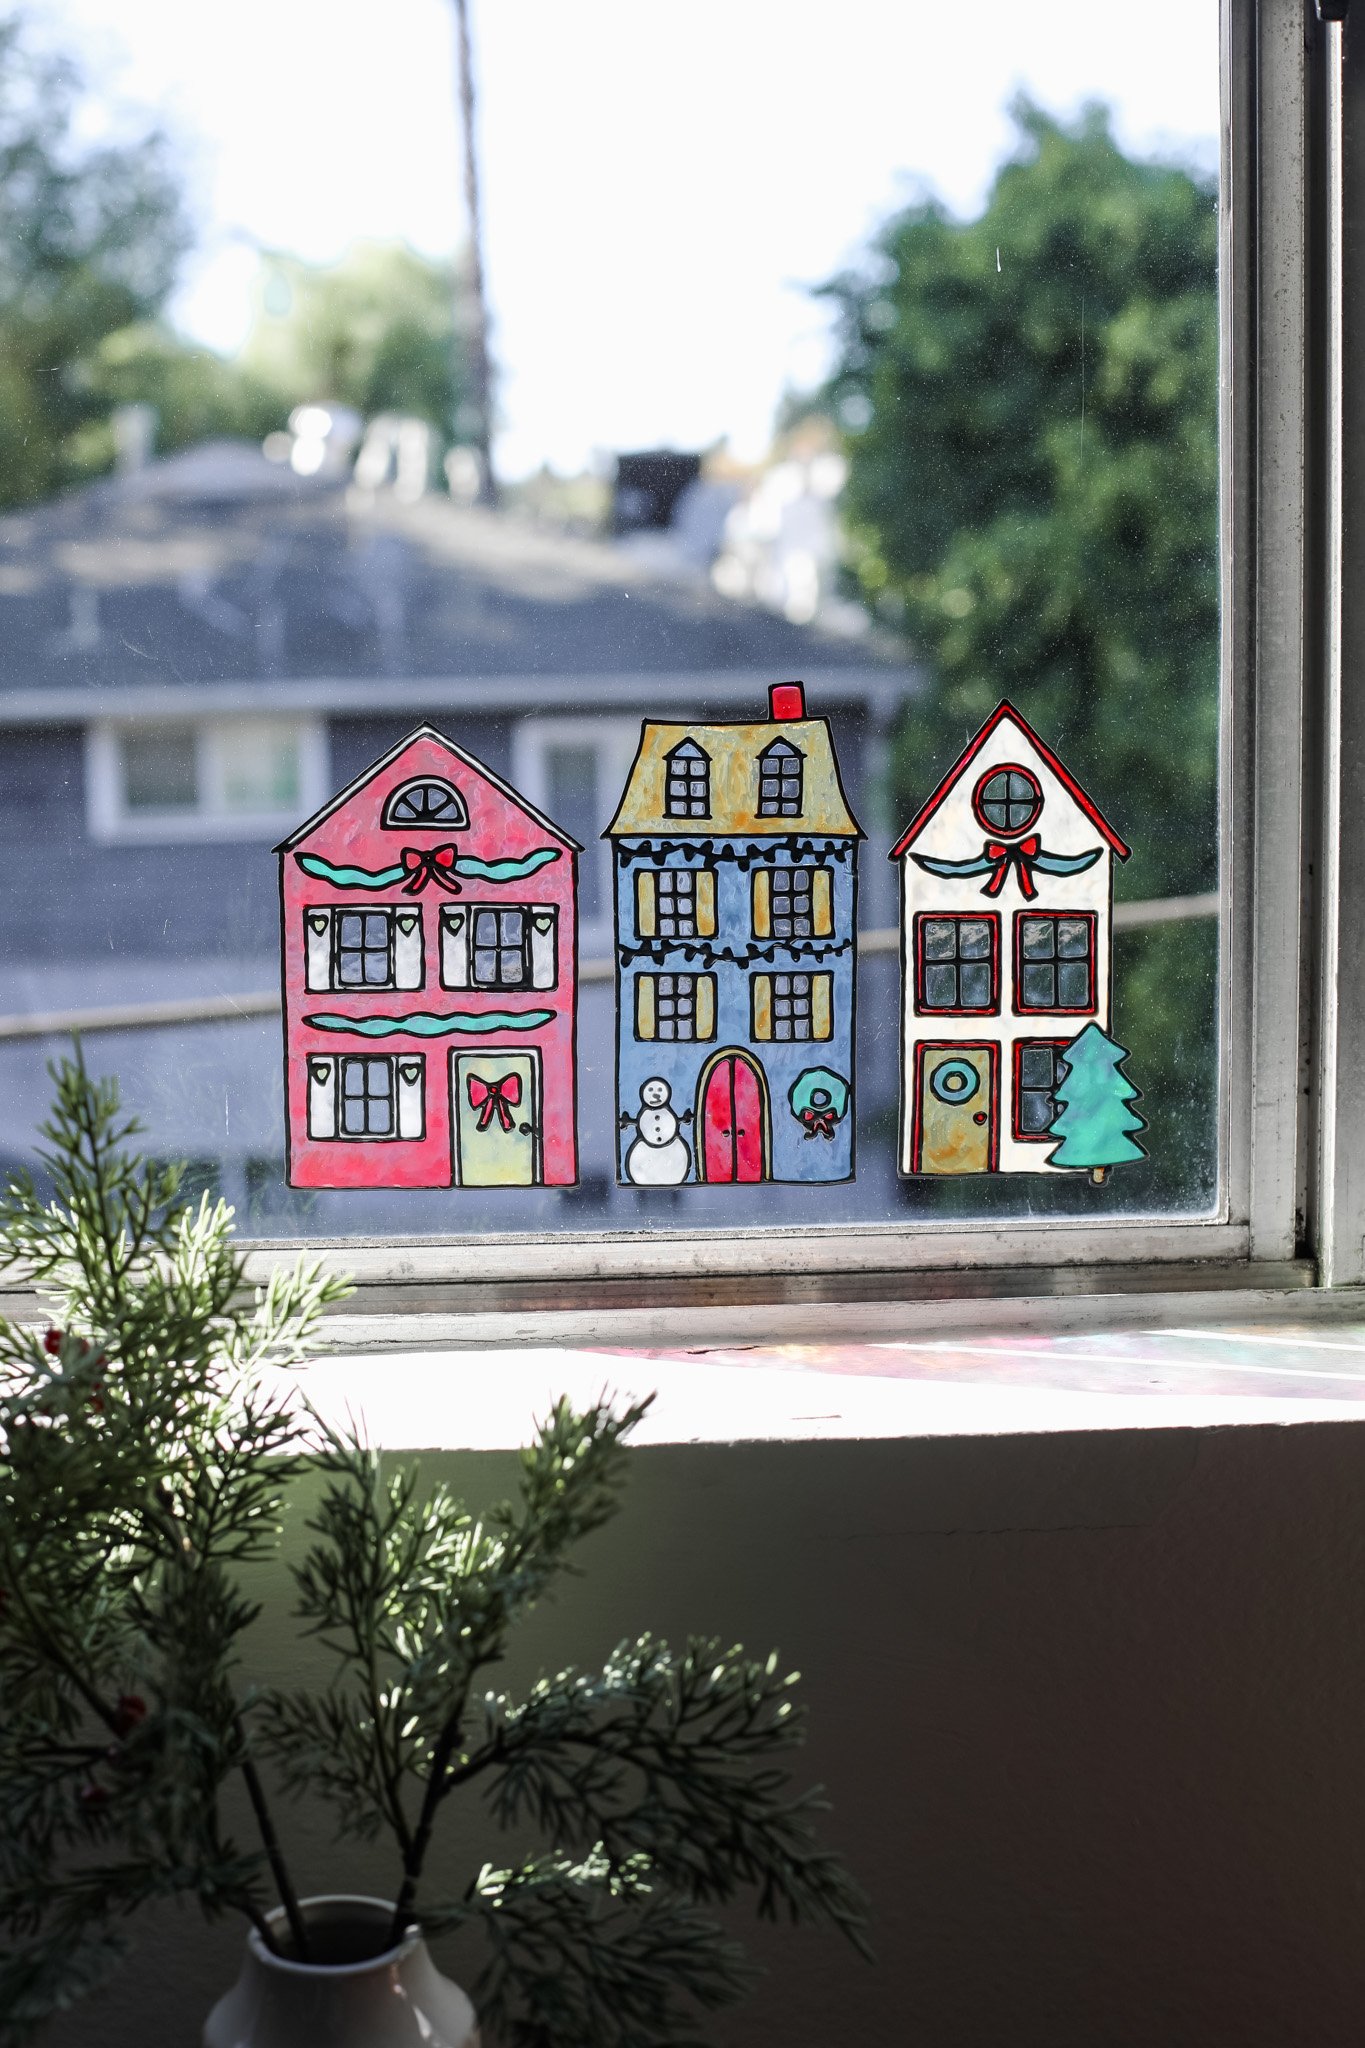 4 Ideas for Decorating with Postcards - Village Frame and Gallery